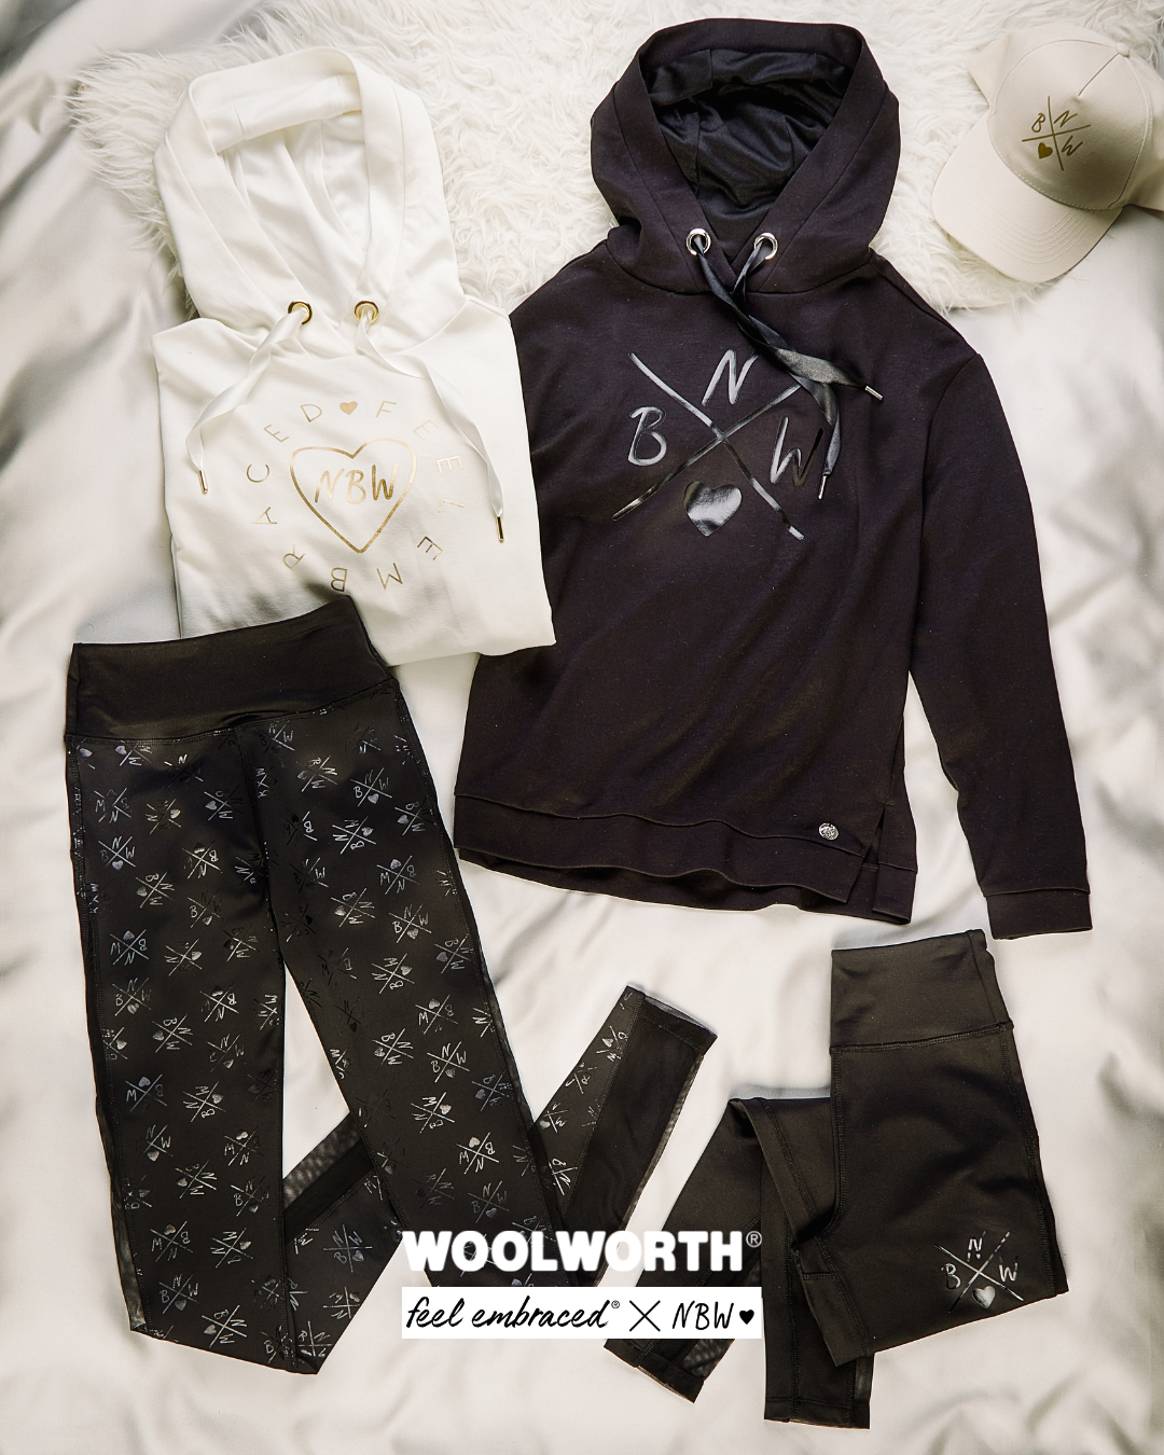 Woolworth x Nathalie Bleicher-Woth. Foto: Woolworth